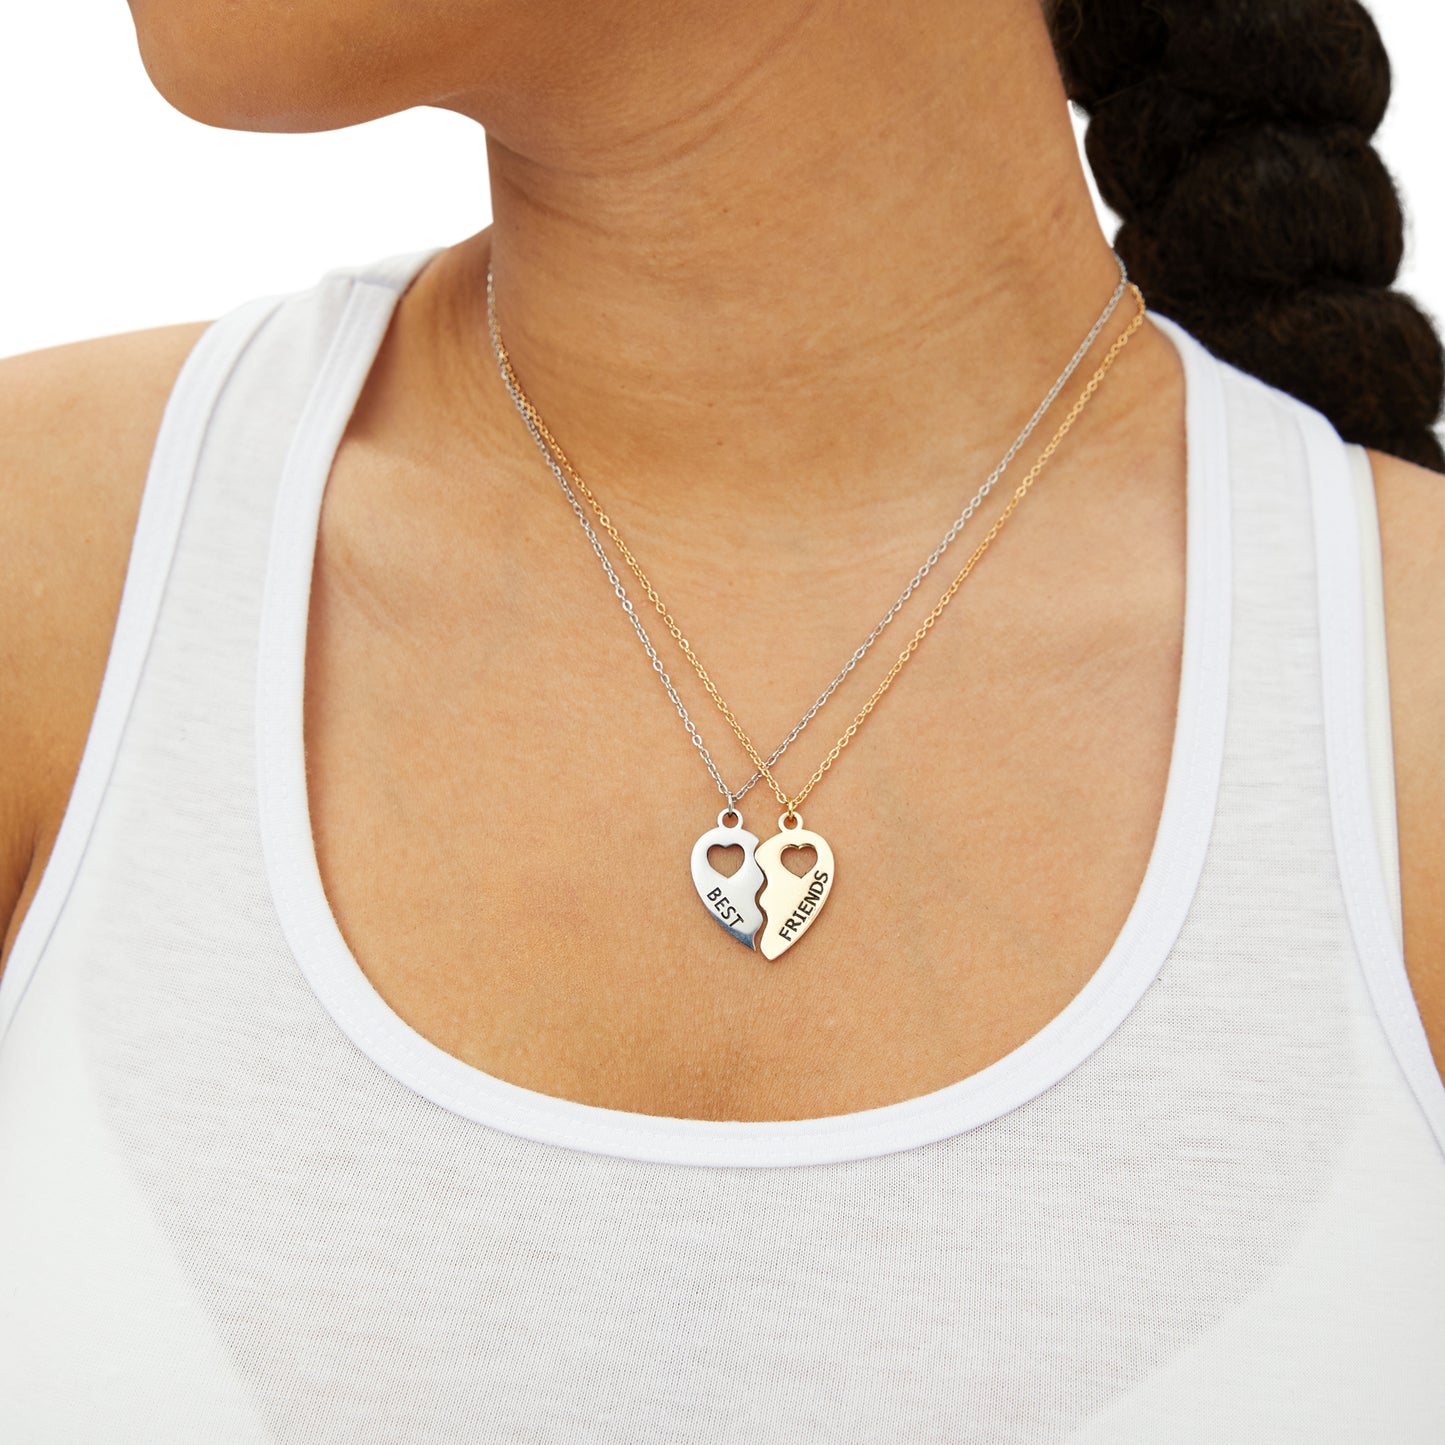 Bully-Proof BFF Half Heart Necklace Set